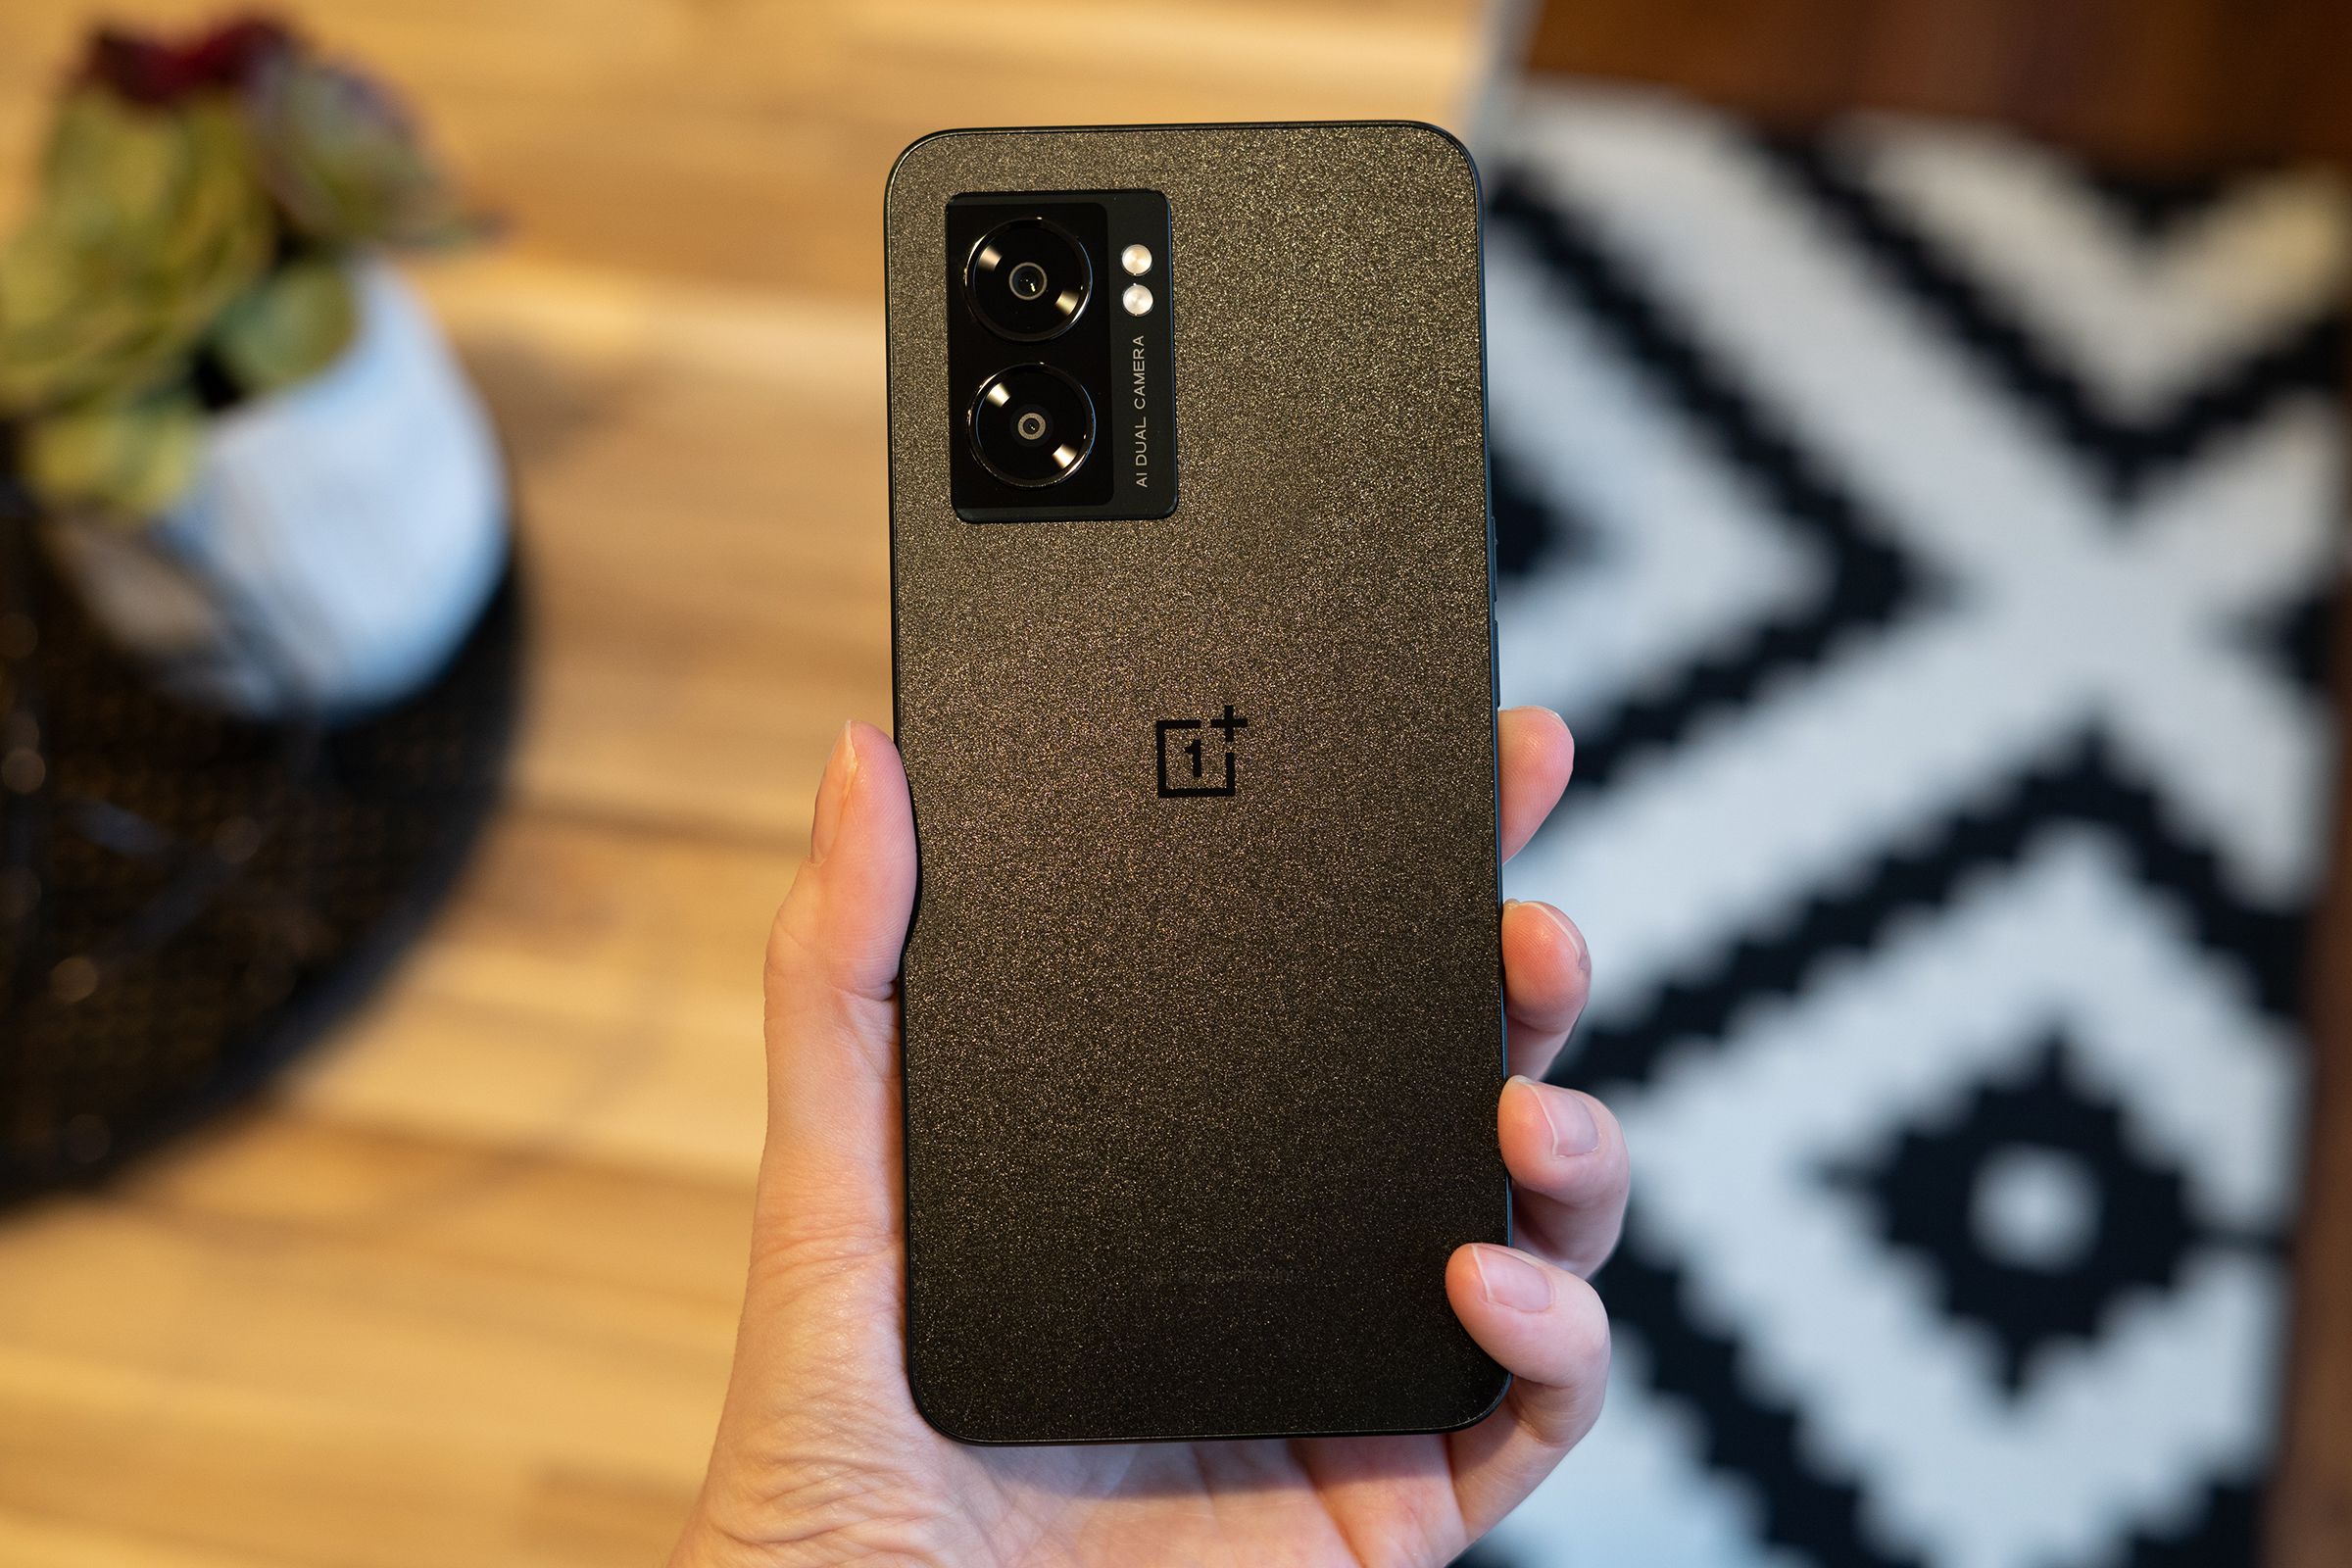 OnePlus N300 in hand showing back panel.